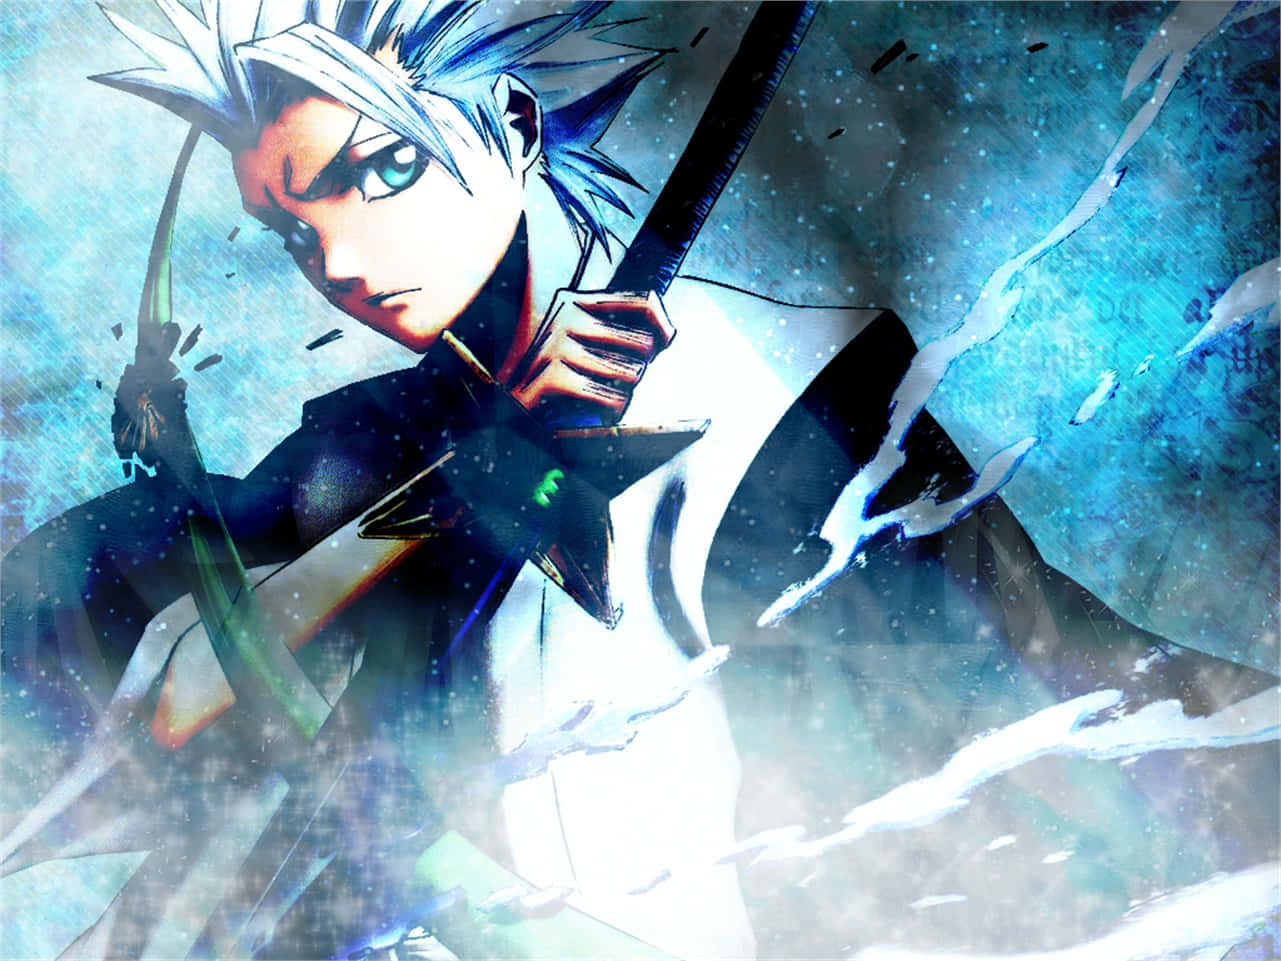 Toshiro Hitsugaya, The Captain Of The 10th Division Of The Gotei 13